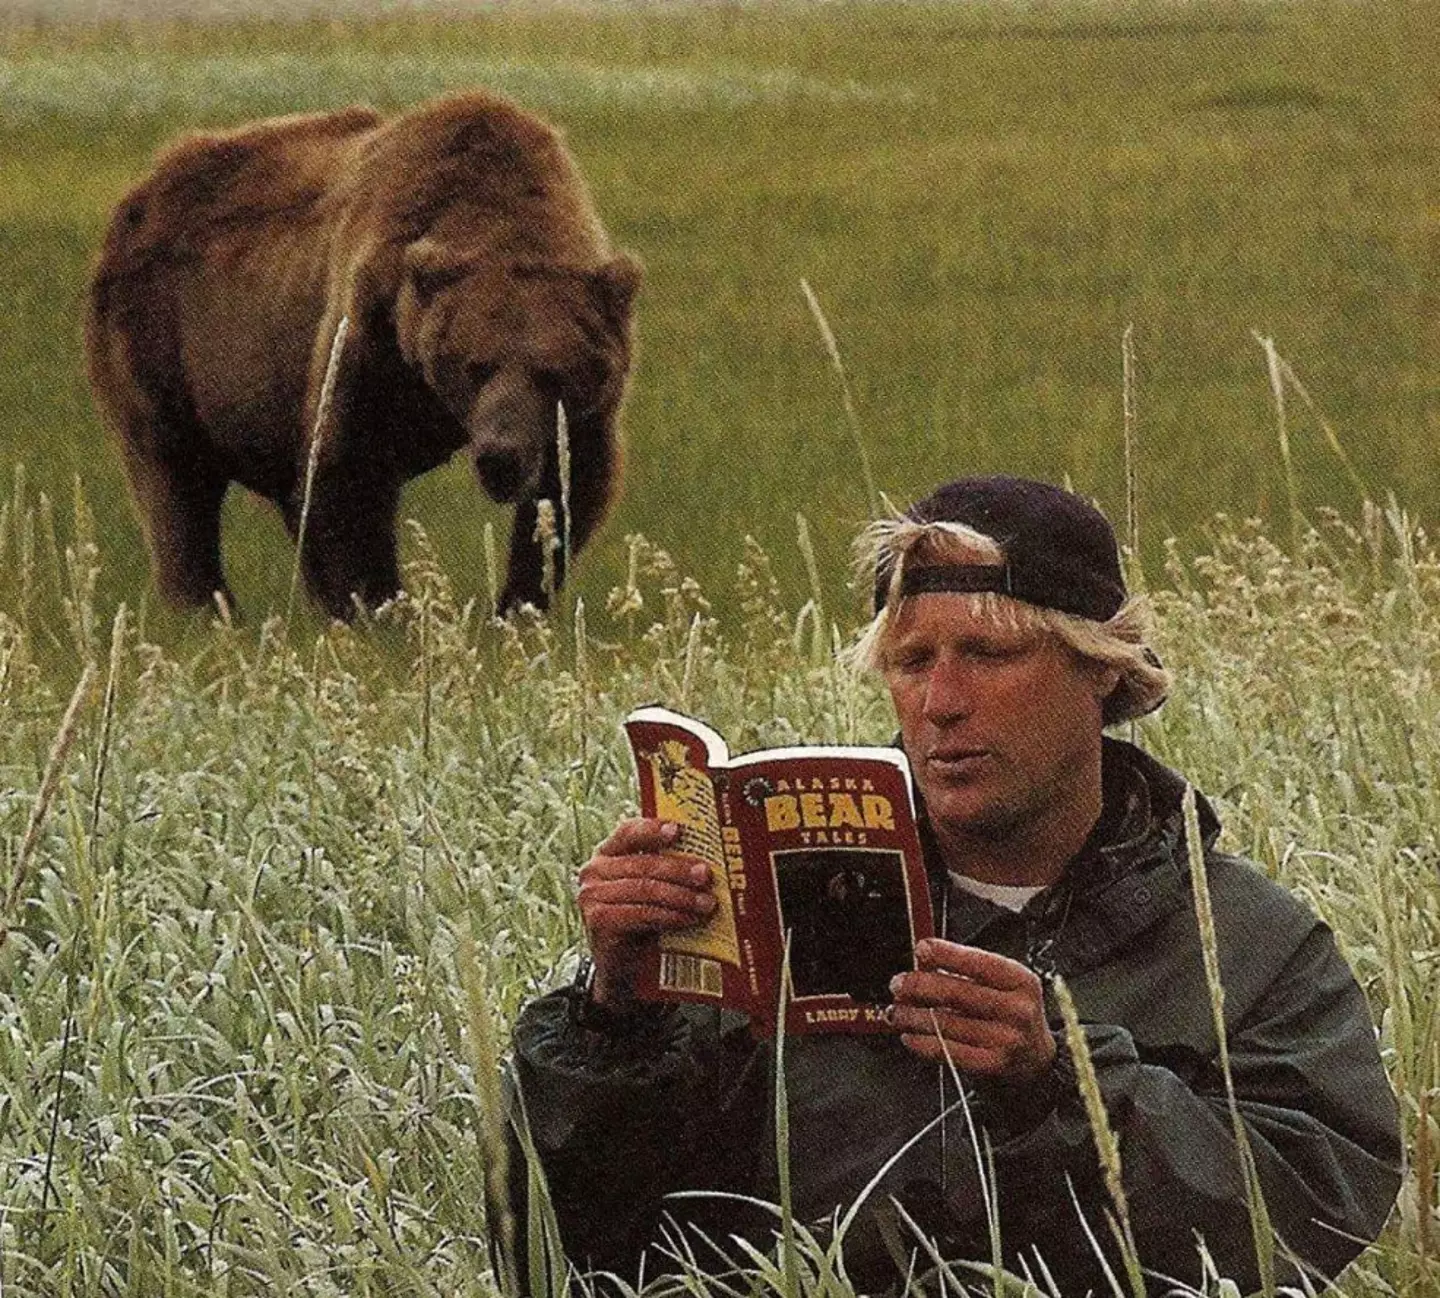 Timothy Treadwell's love of bears ended up costing him his life. (Lionsgate Films)